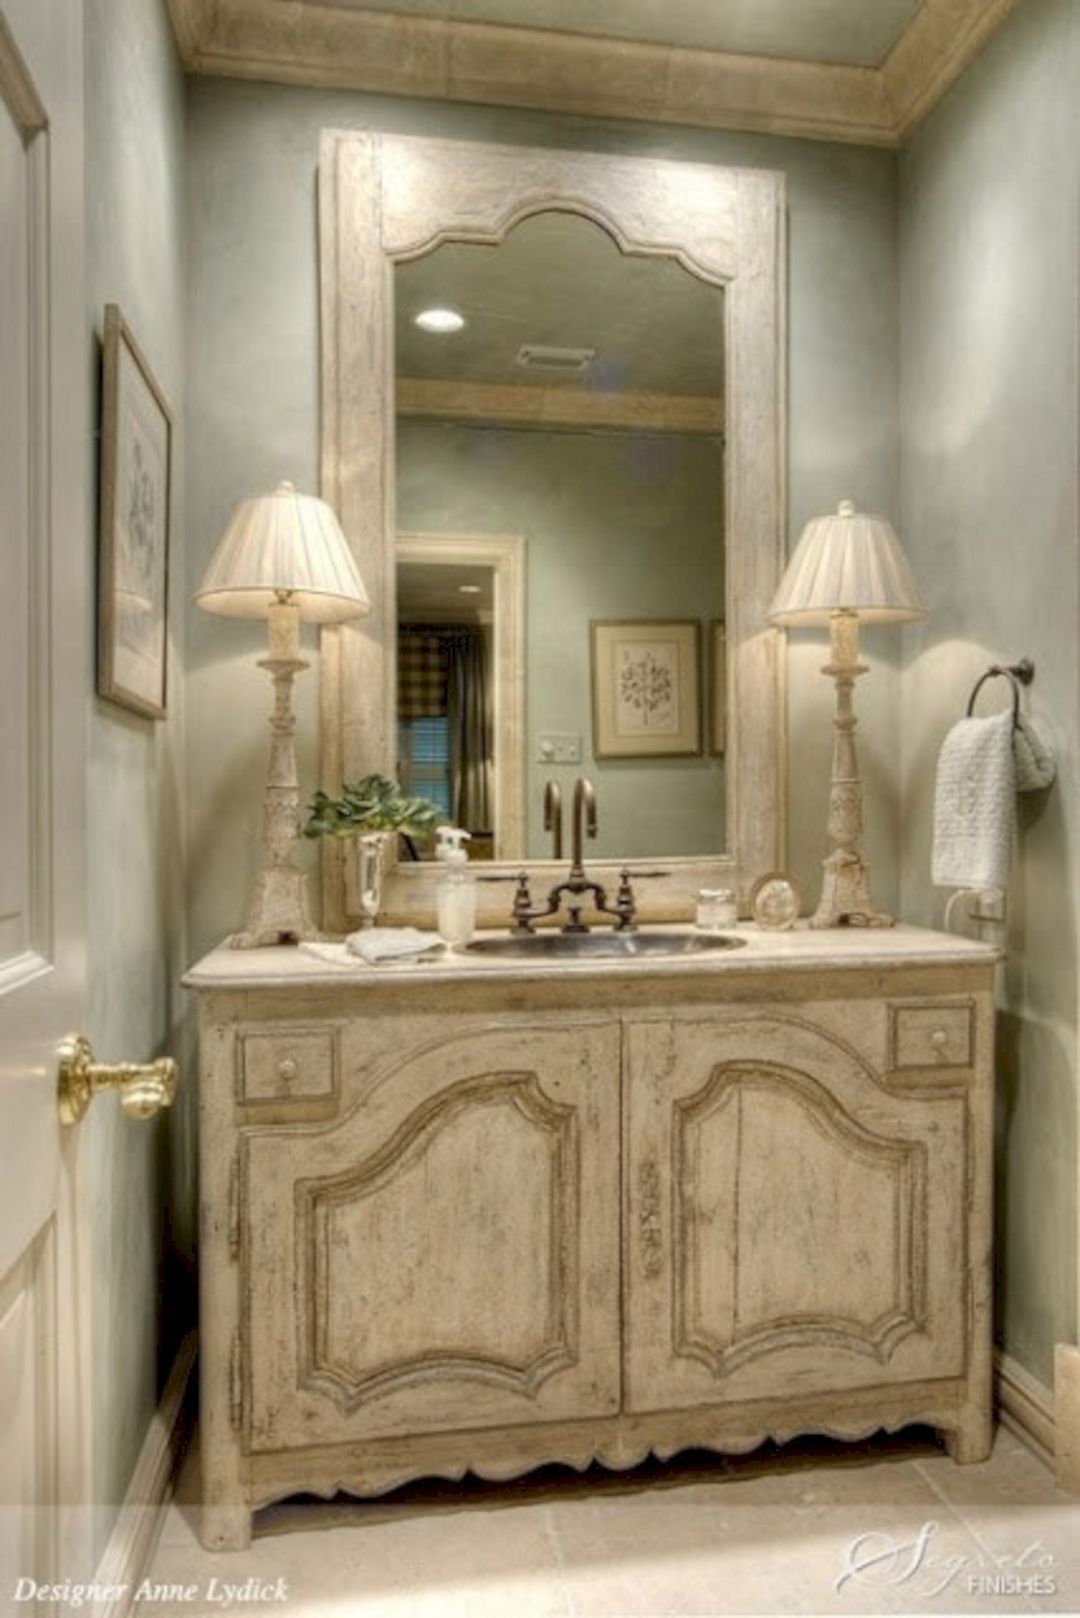 Best Ideas French Country Style Home Designs 1 (Best Ideas French Country Style Home Designs 1) design ideas and photos -   18 french decor bathroom
 ideas